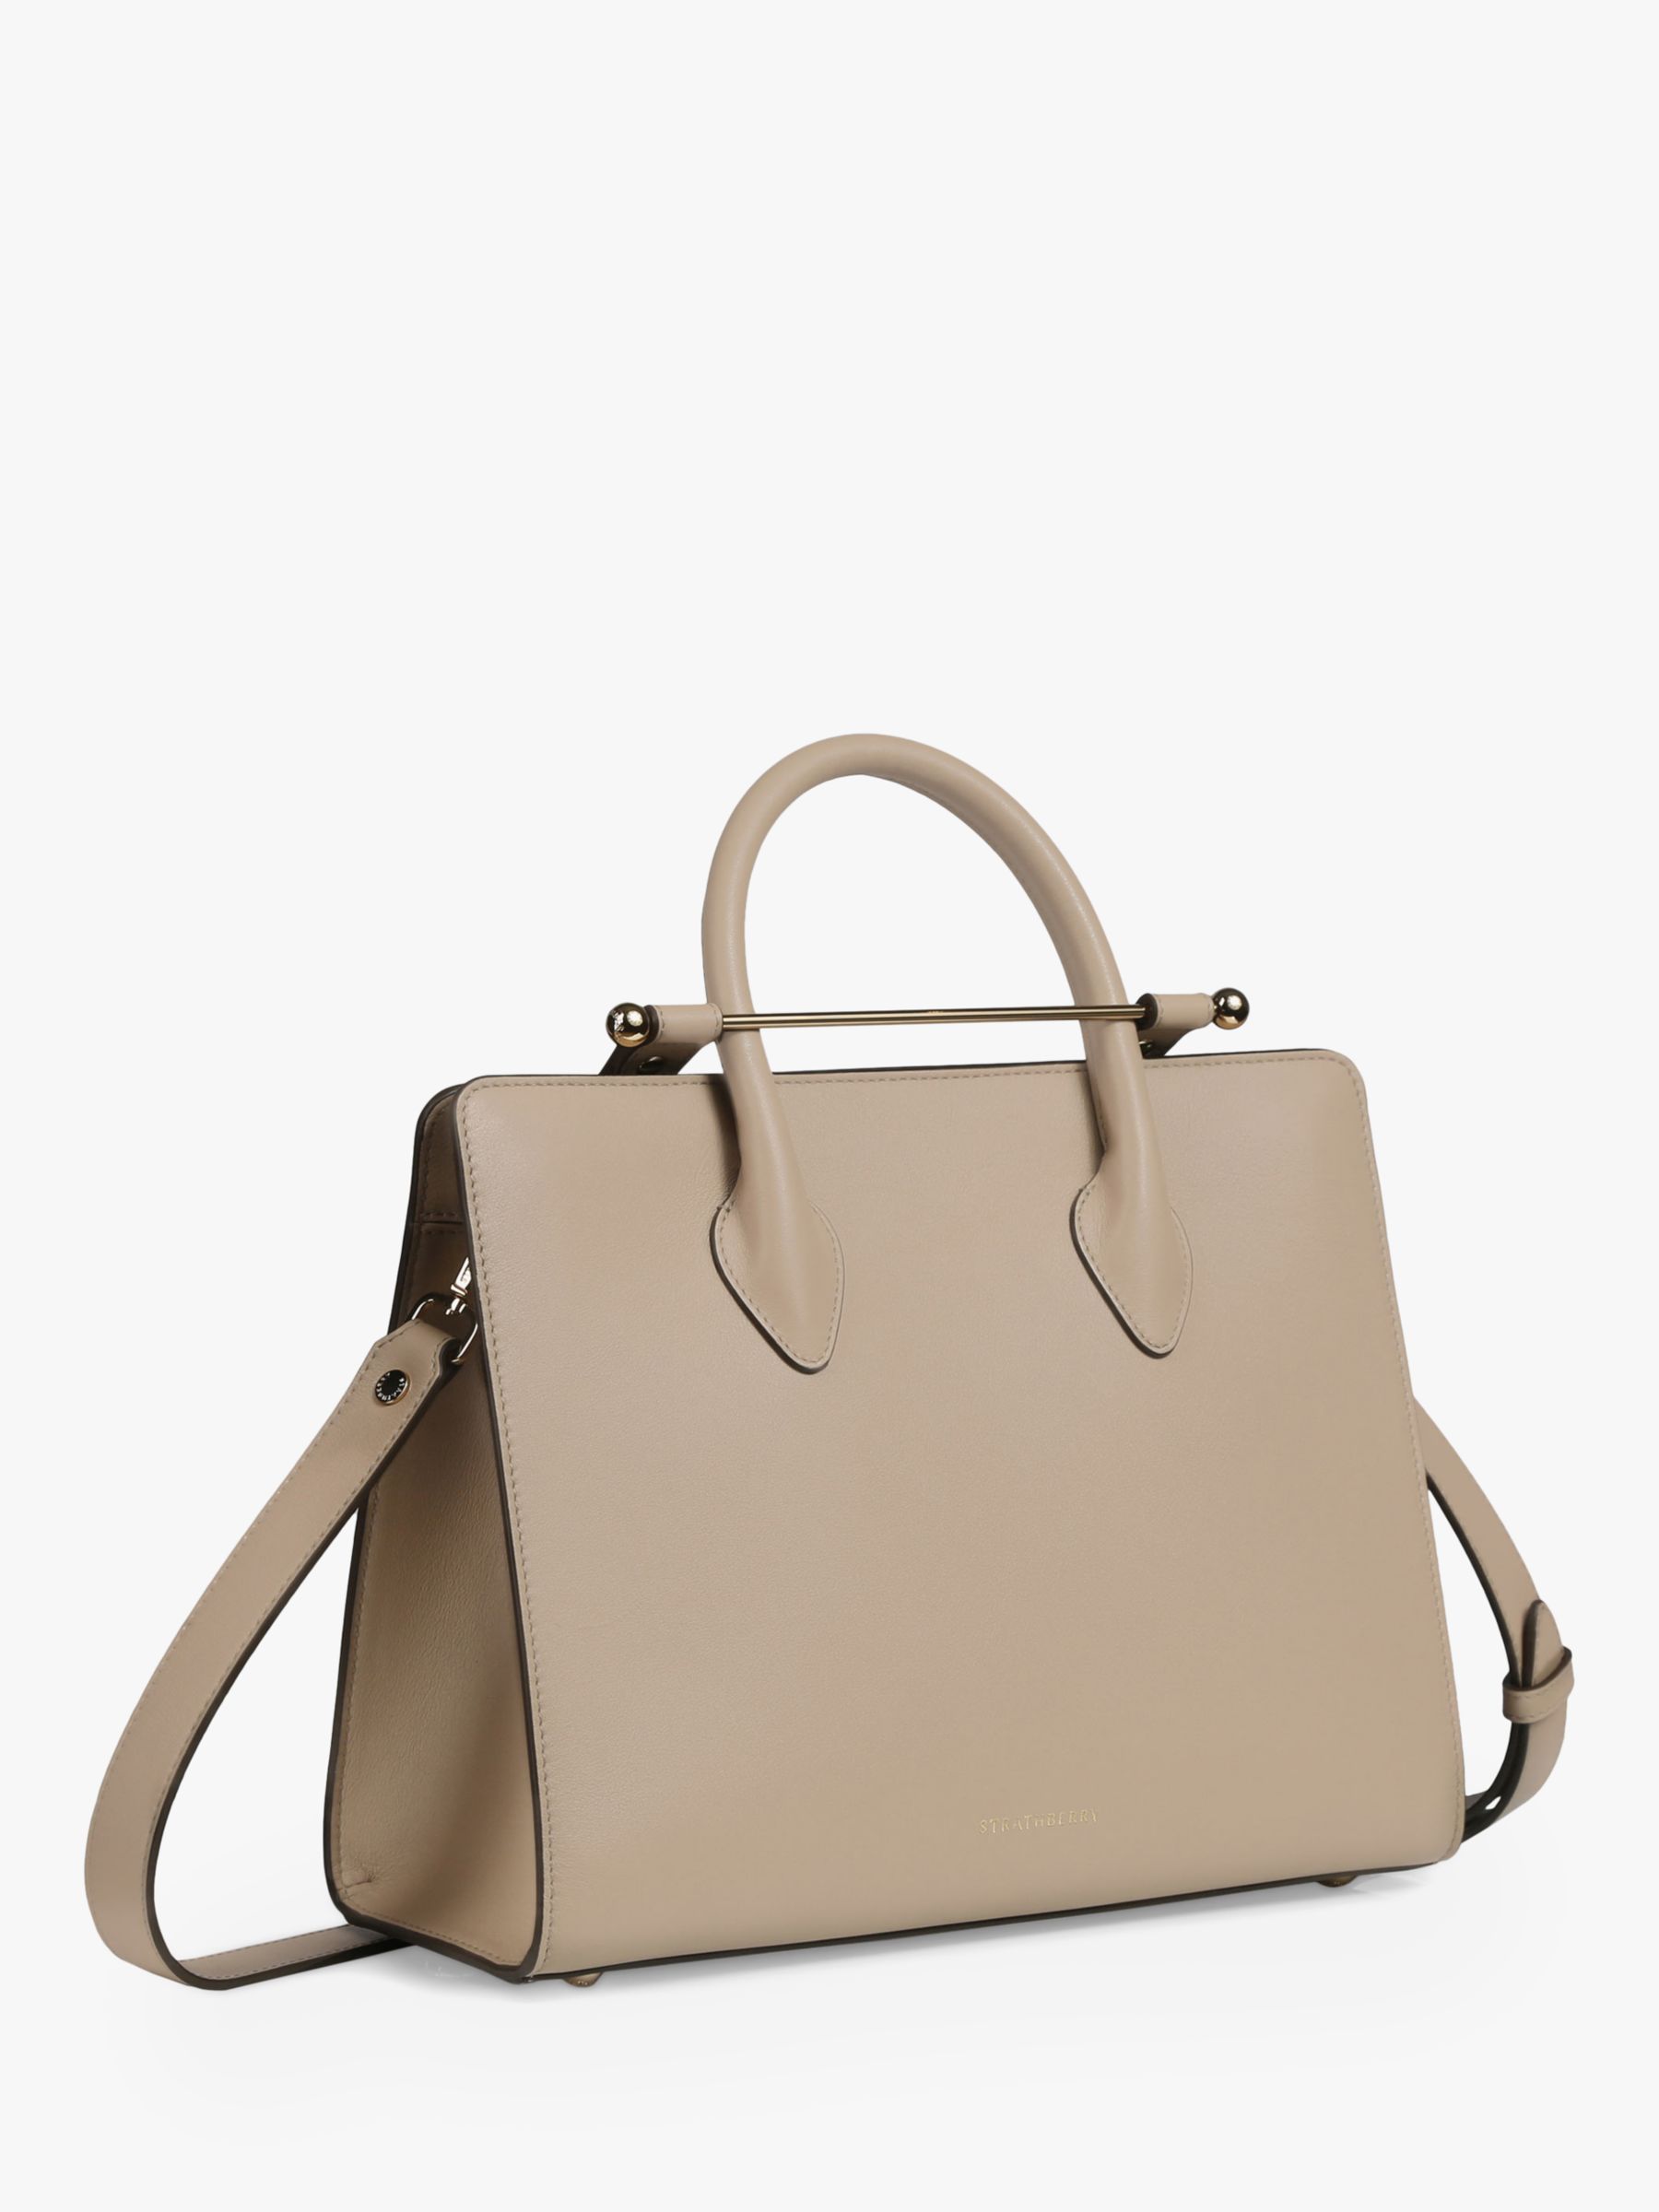 Buy Strathberry THE STRATHBERRY MIDI TOTE TOP HANDLE BAG